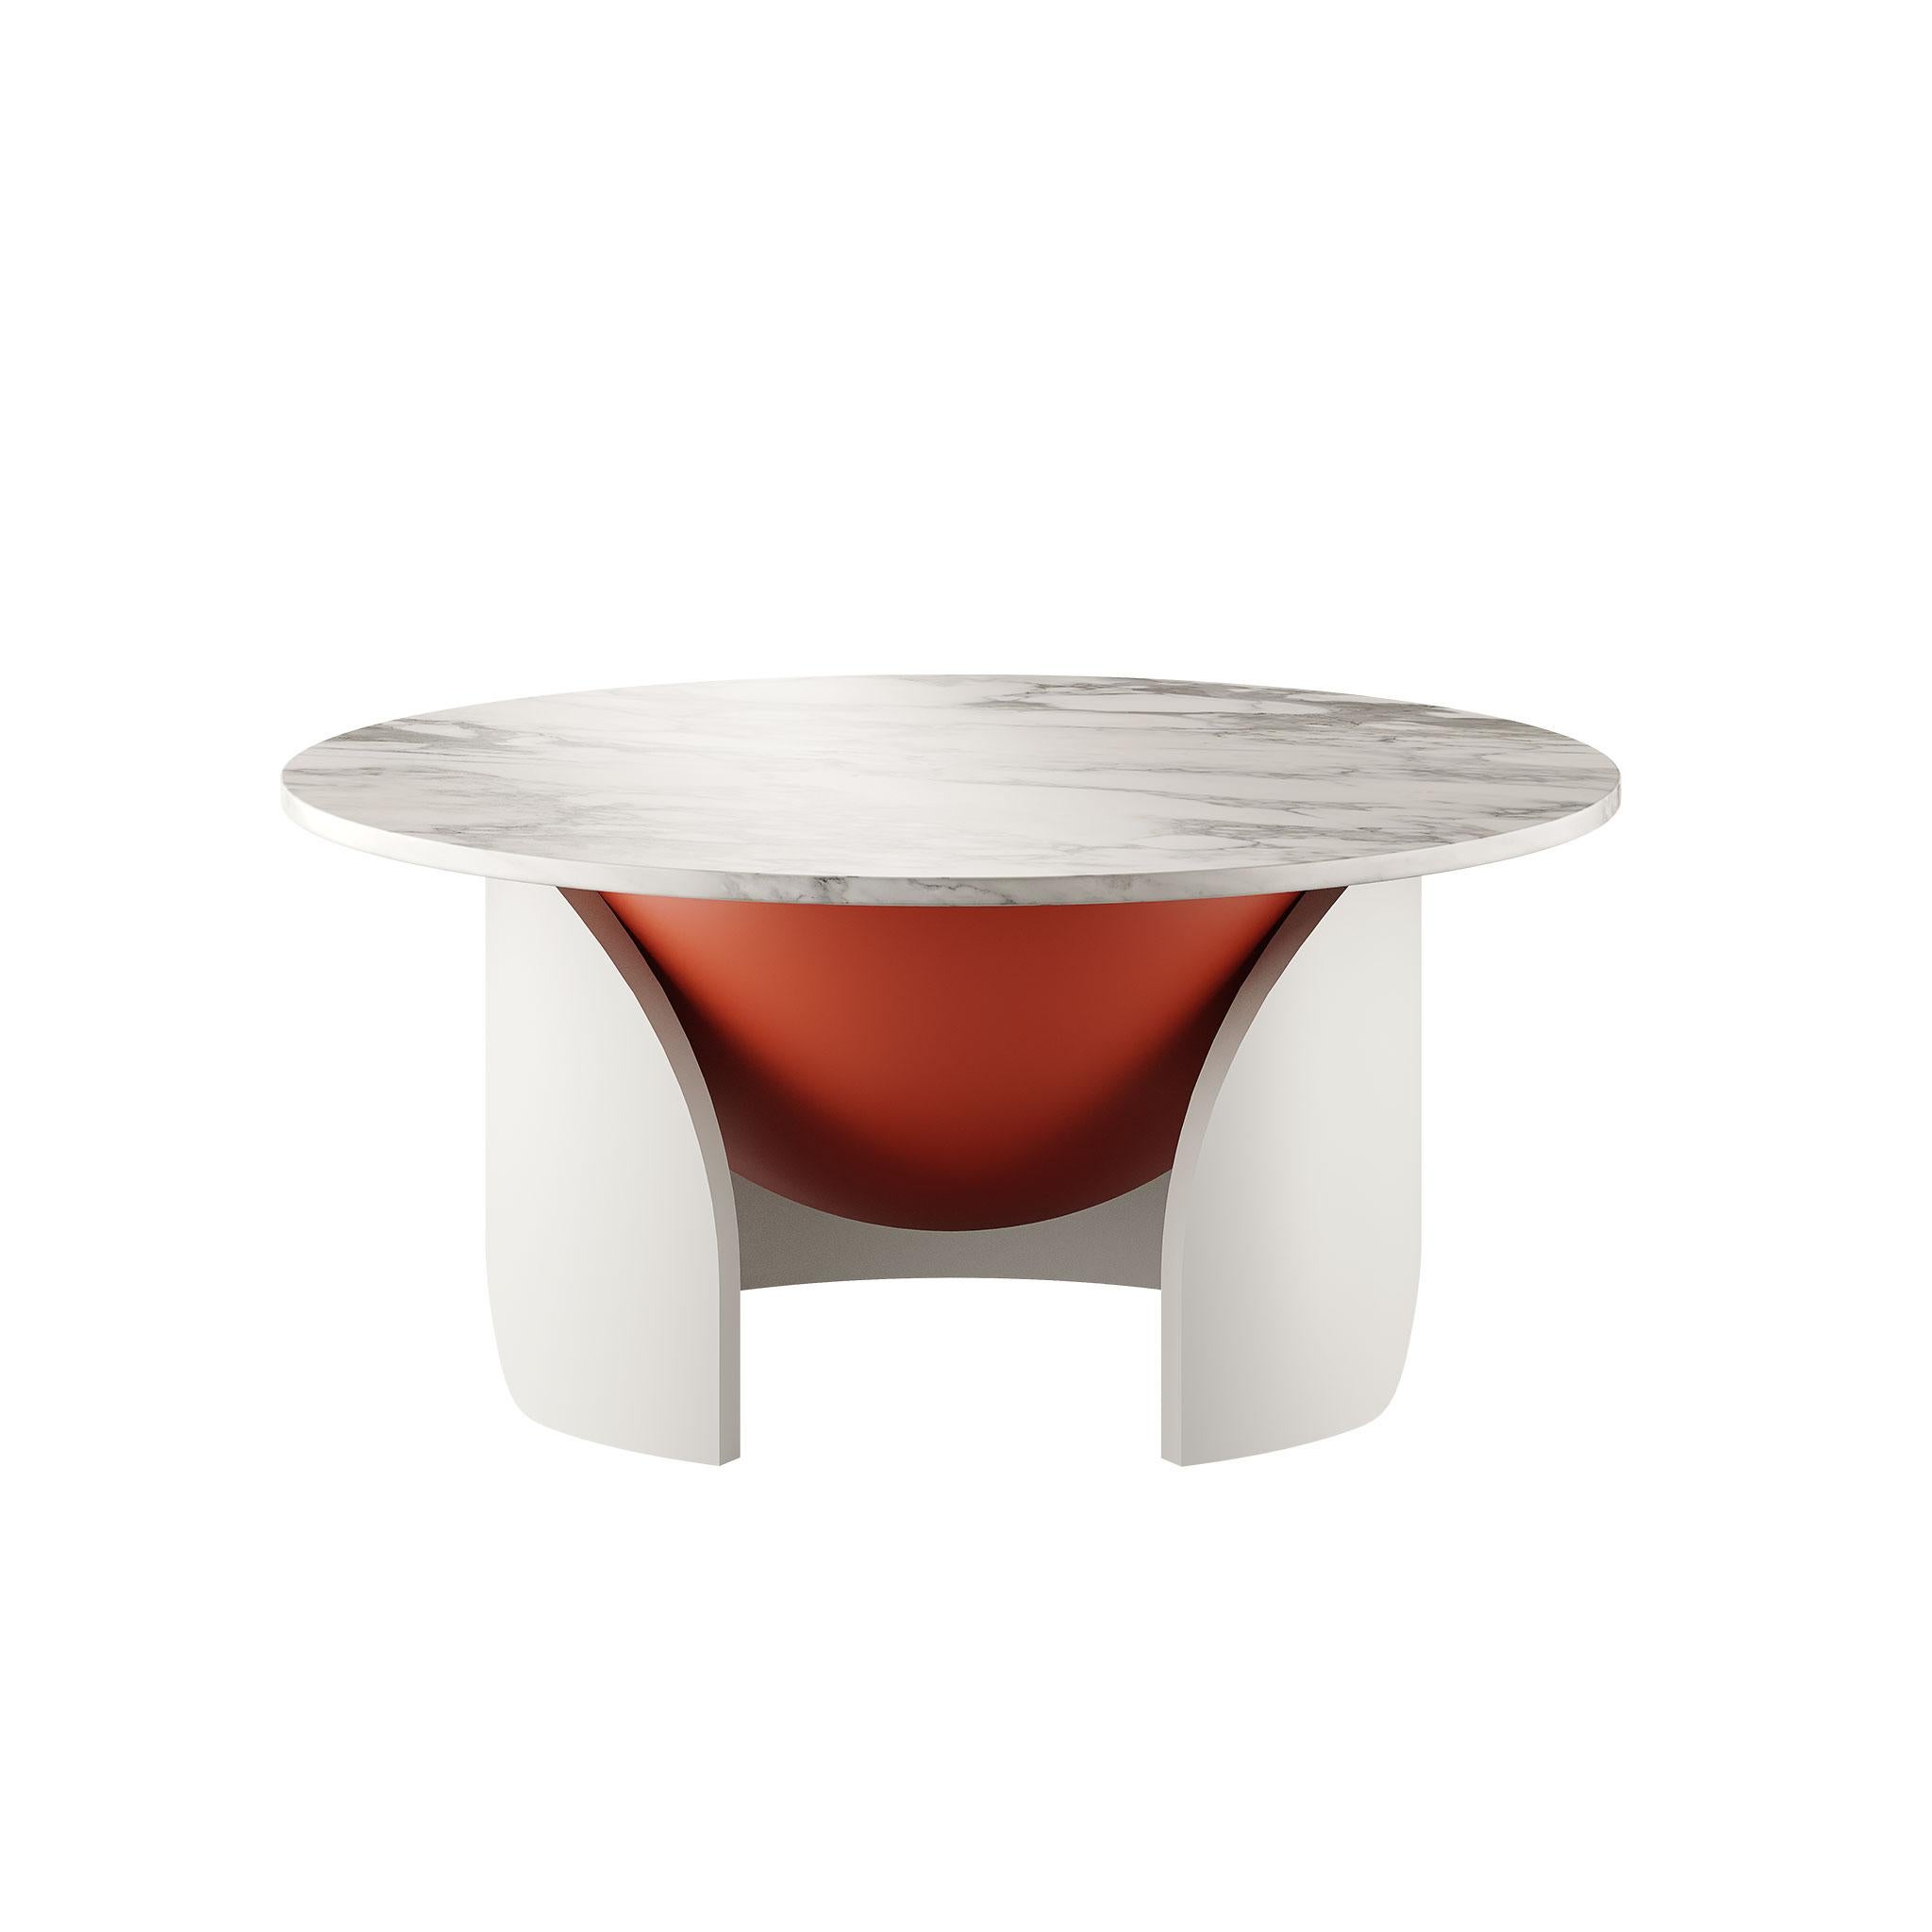 Explore the epitome of modern luxury with our Contemporary Center Table featuring exquisite Calacatta White Marble and a distinctive orange round ball nestled within its interior.
Meticulously crafted, this table seamlessly blends timeless elegance